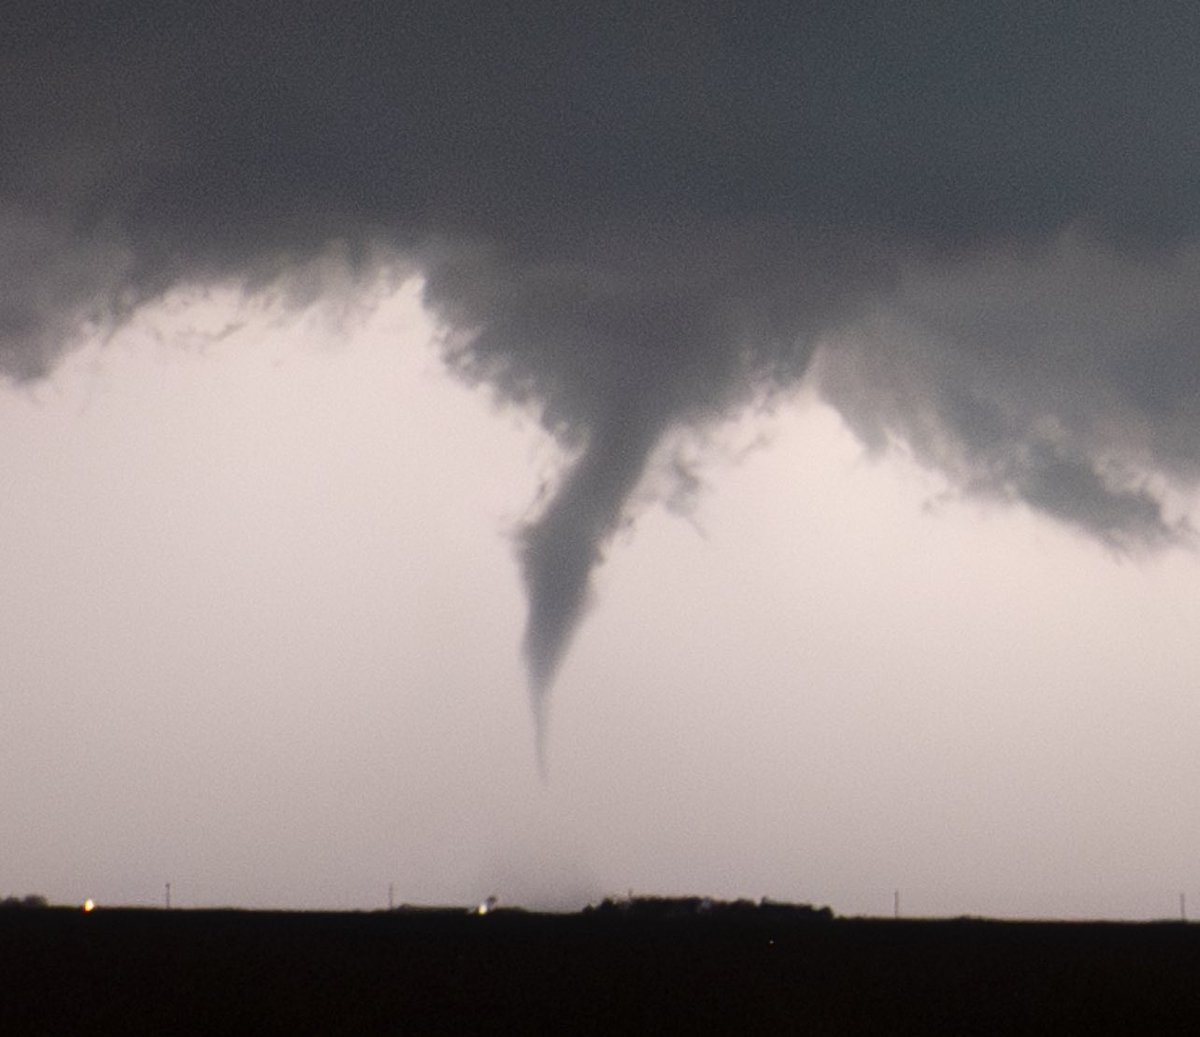 @NWSNorman @NWSNorman Has there any indication that the brief couplet and funnel ever made it to the ground just north of Hollister? It would have been around 9:28pm on 4/30/24. I was a bit aways from it but it looks like there might have been ground rotation, but it’s hard to tell.